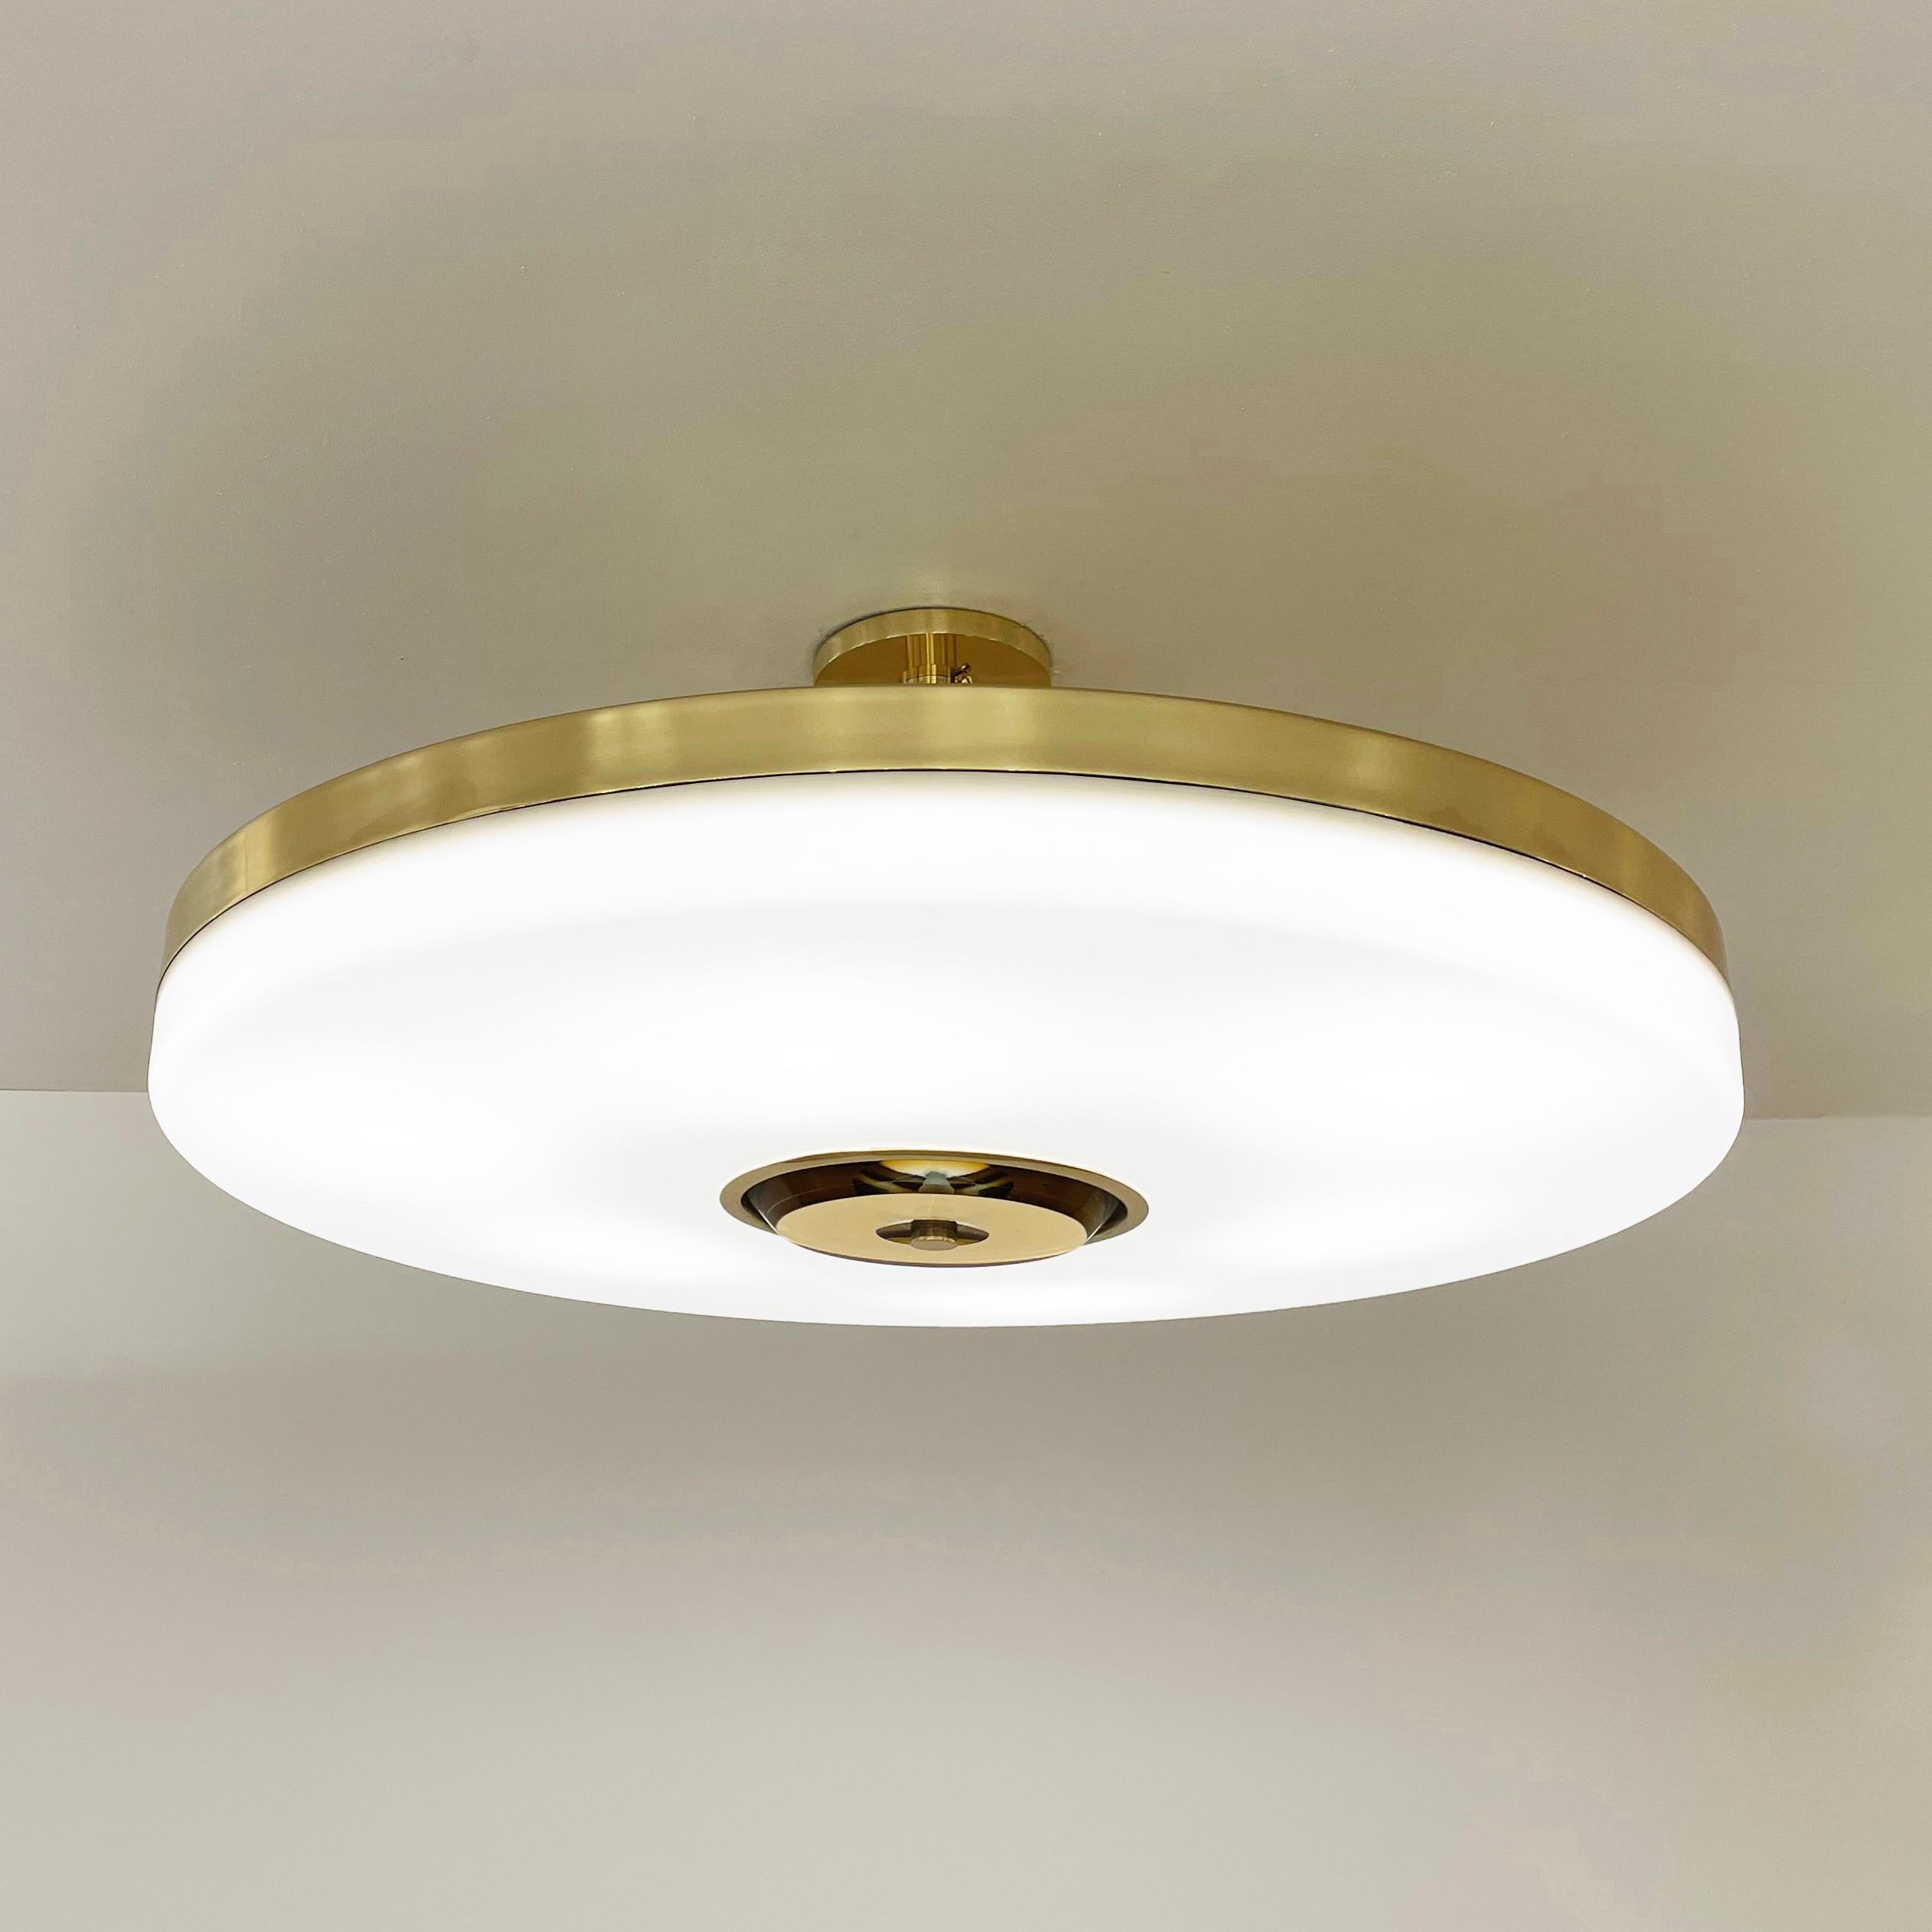 Iris Grande Ceiling Light by Gaspare Asaro-Polished Nickel Finish In New Condition For Sale In New York, NY